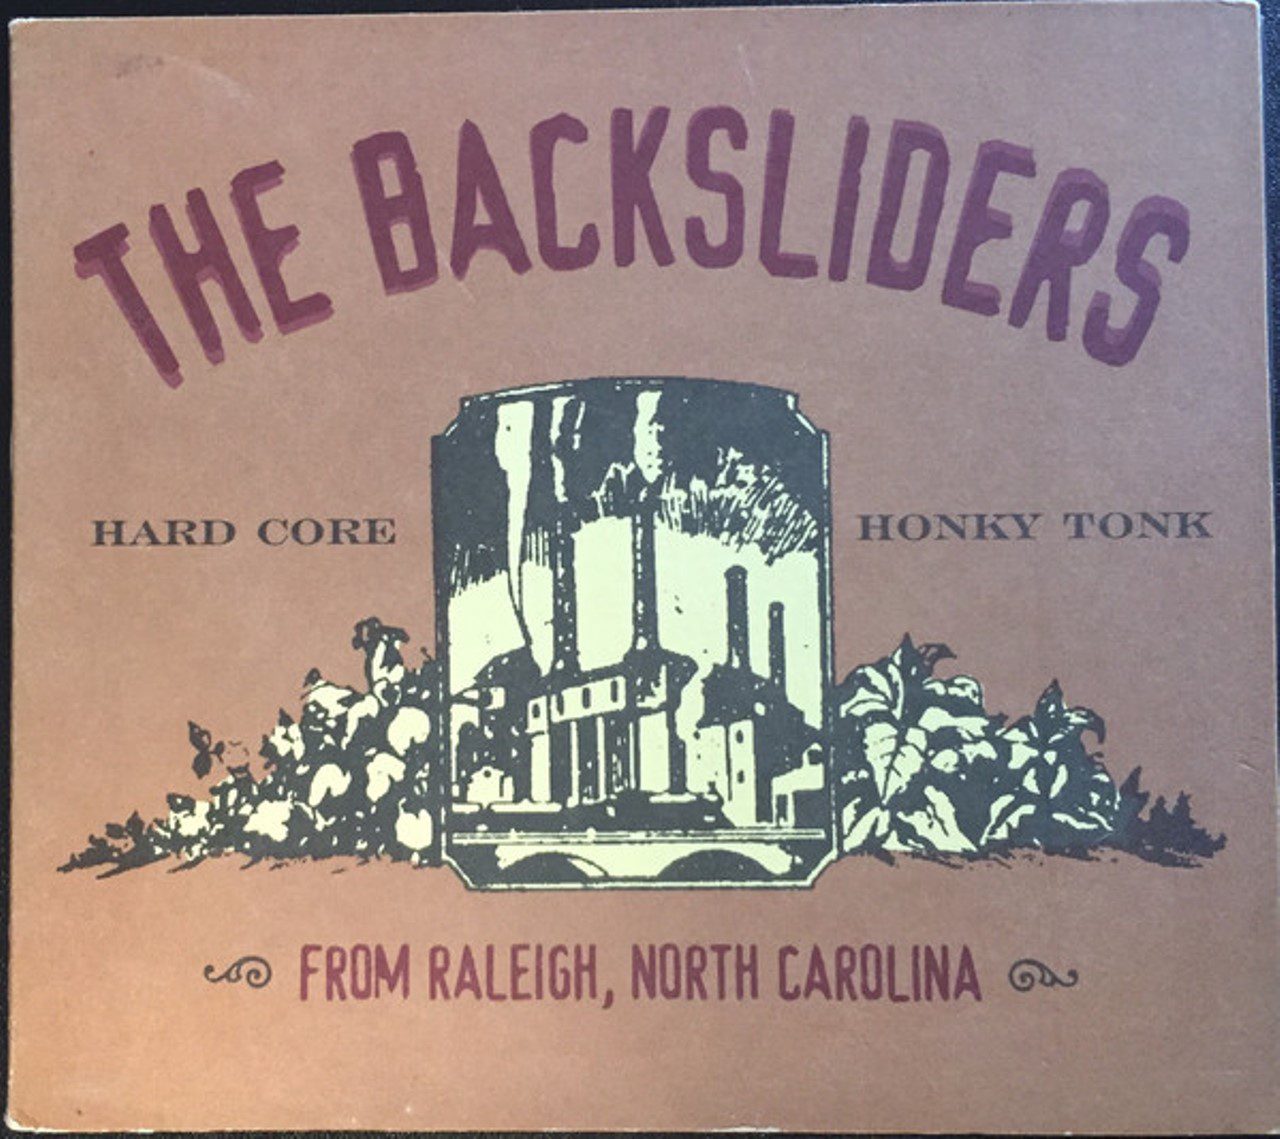 Backsliders - From Raleigh, North Carolina cover album